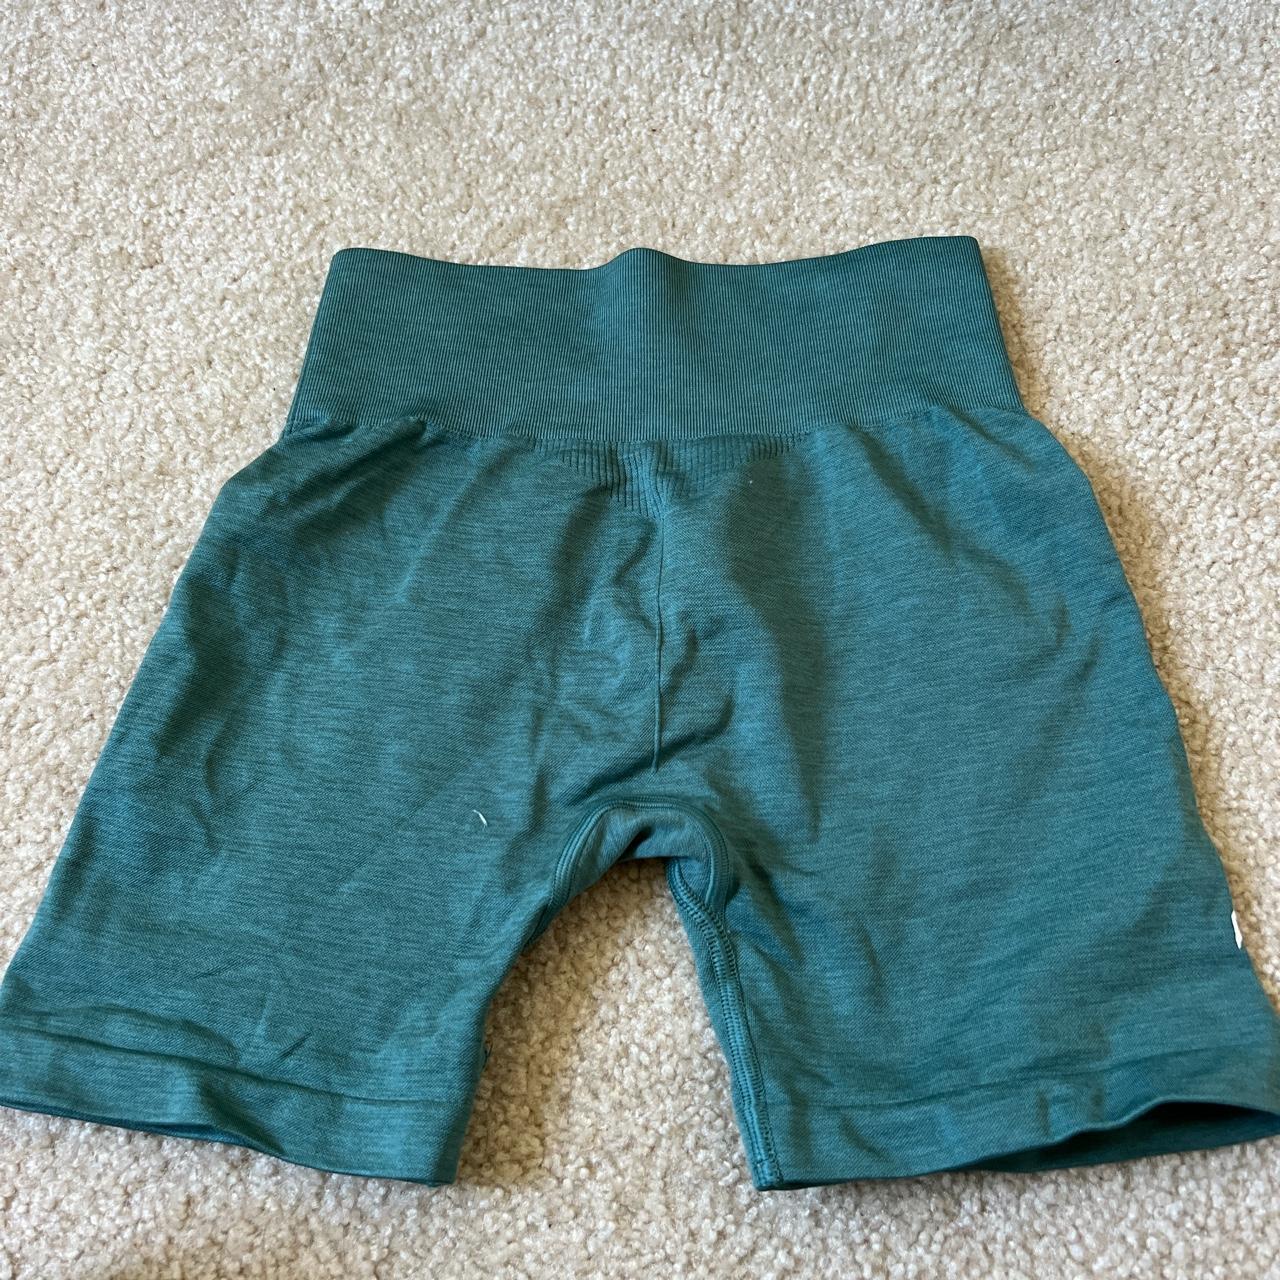 Product Image 2 - Mineral green oner active shorts!!